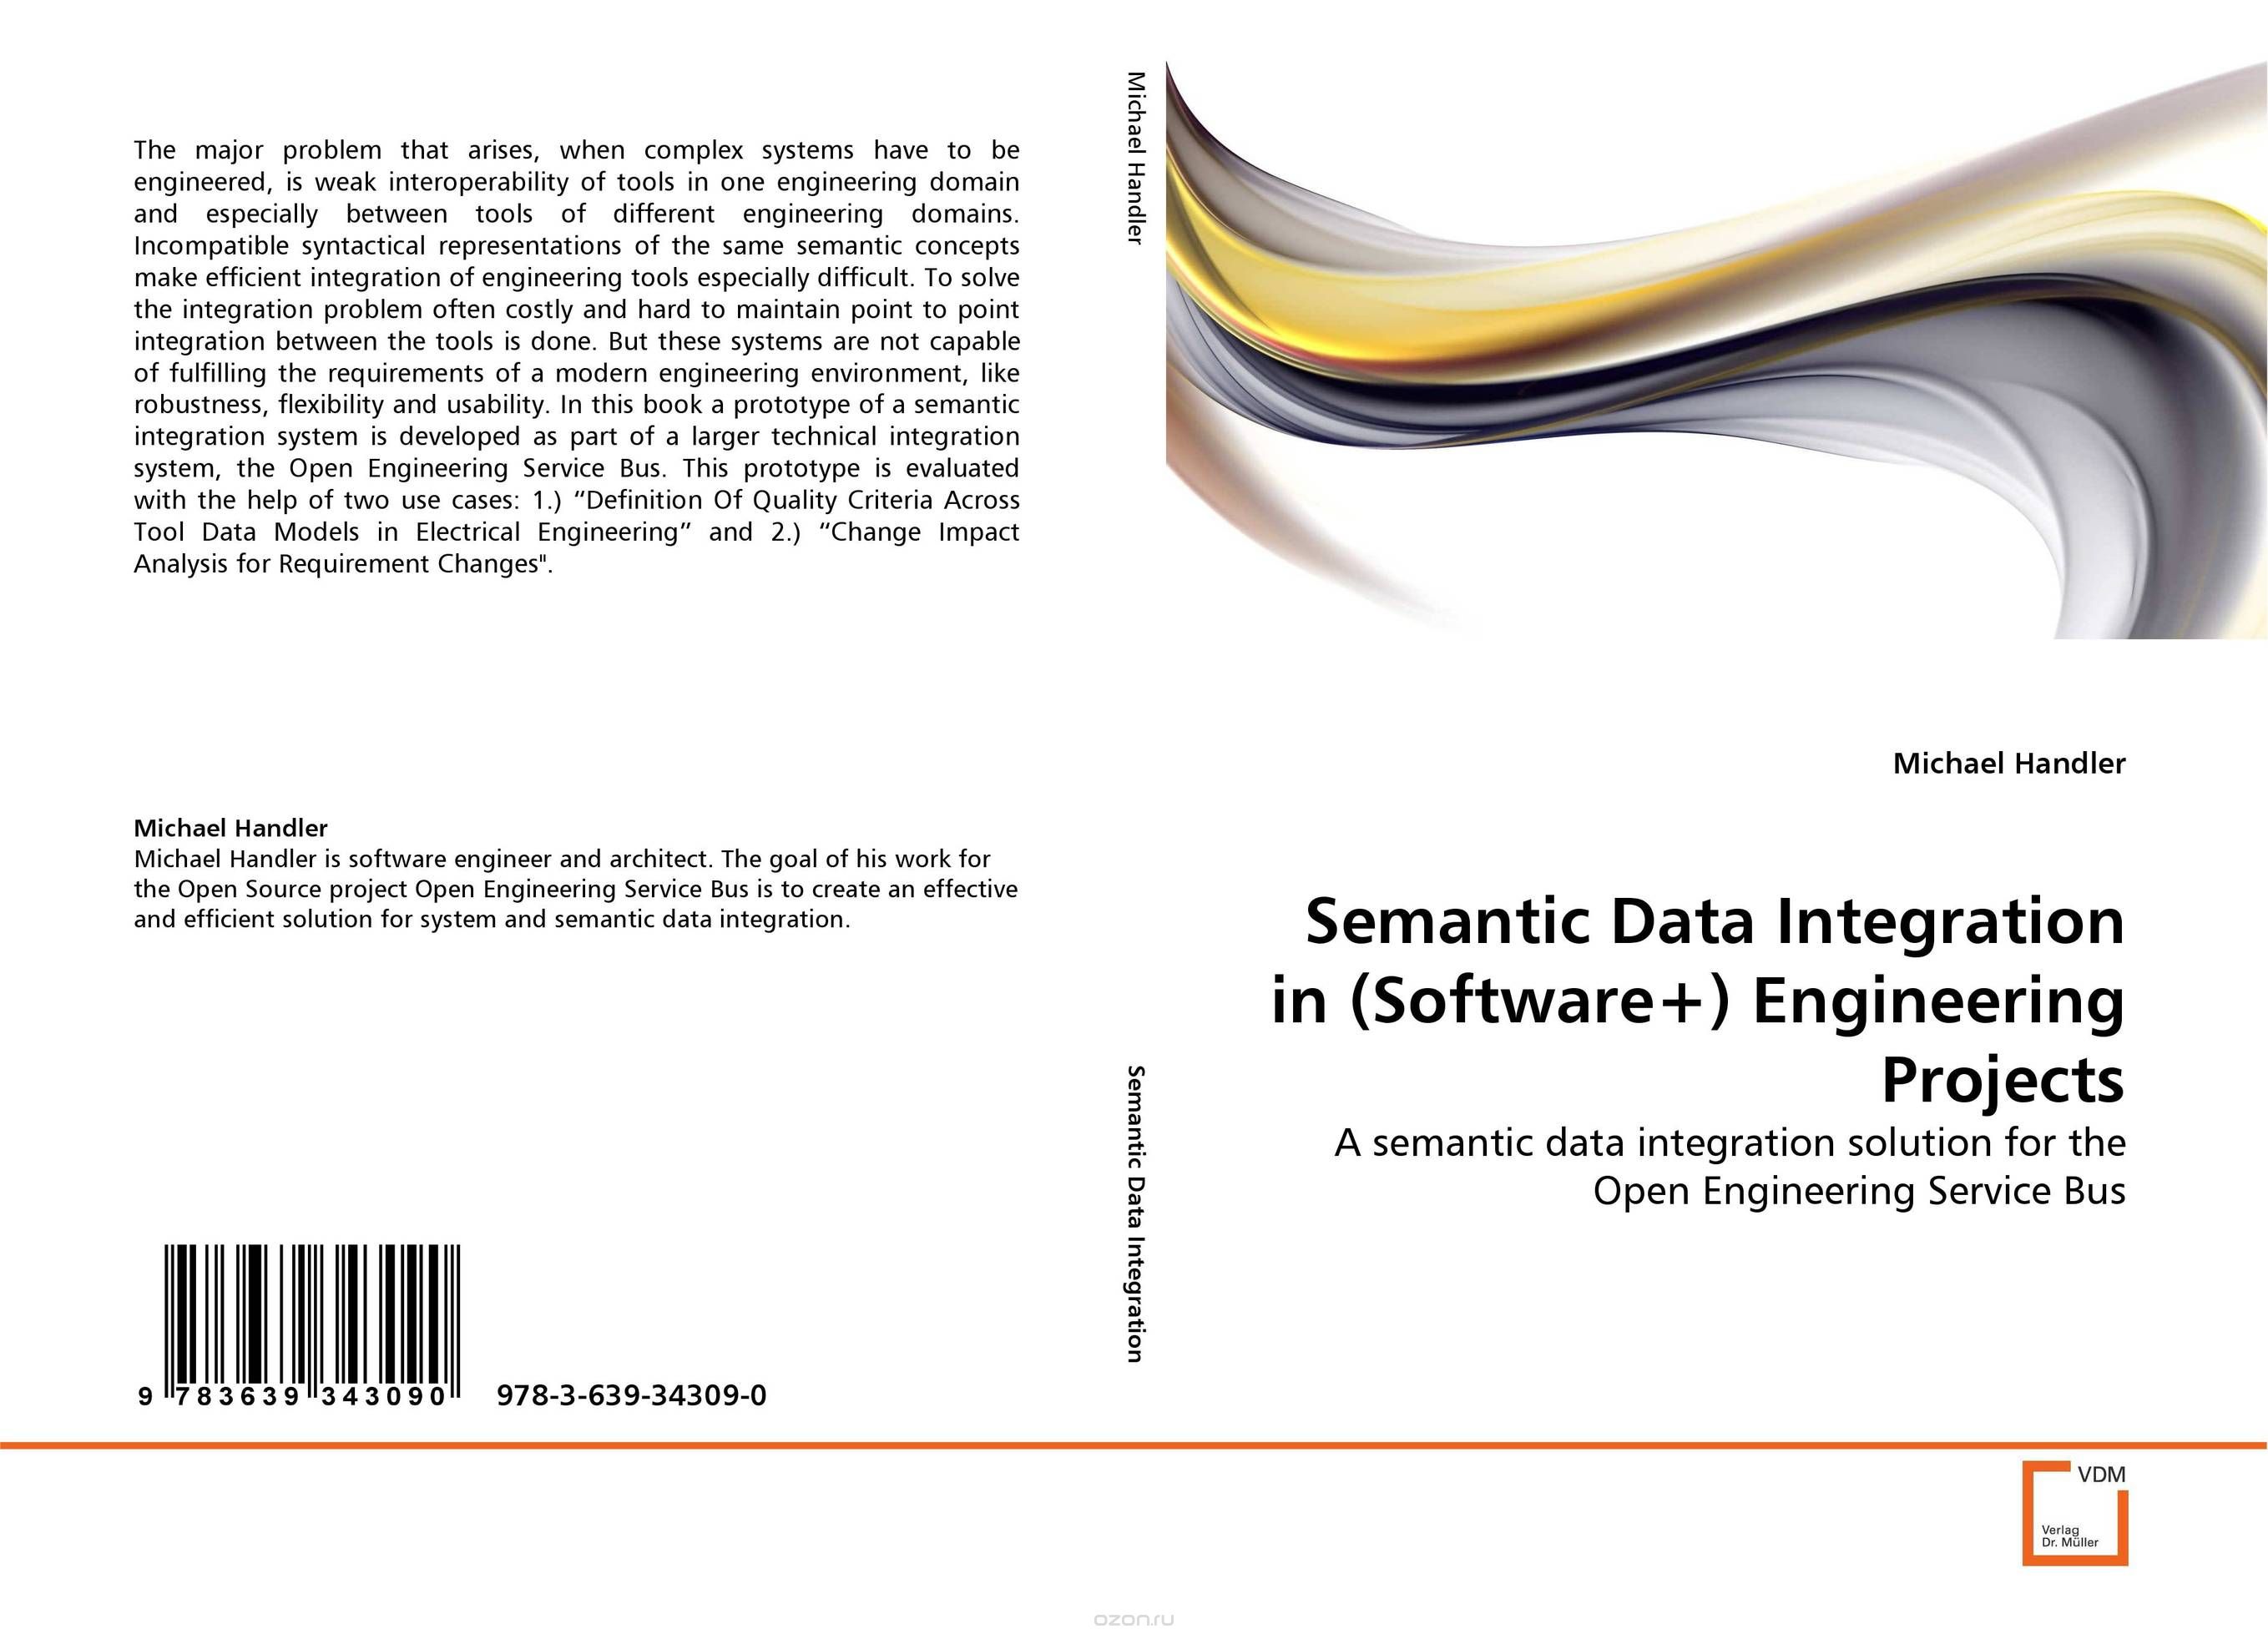 Semantic Data Integration in (Software+) Engineering Projects